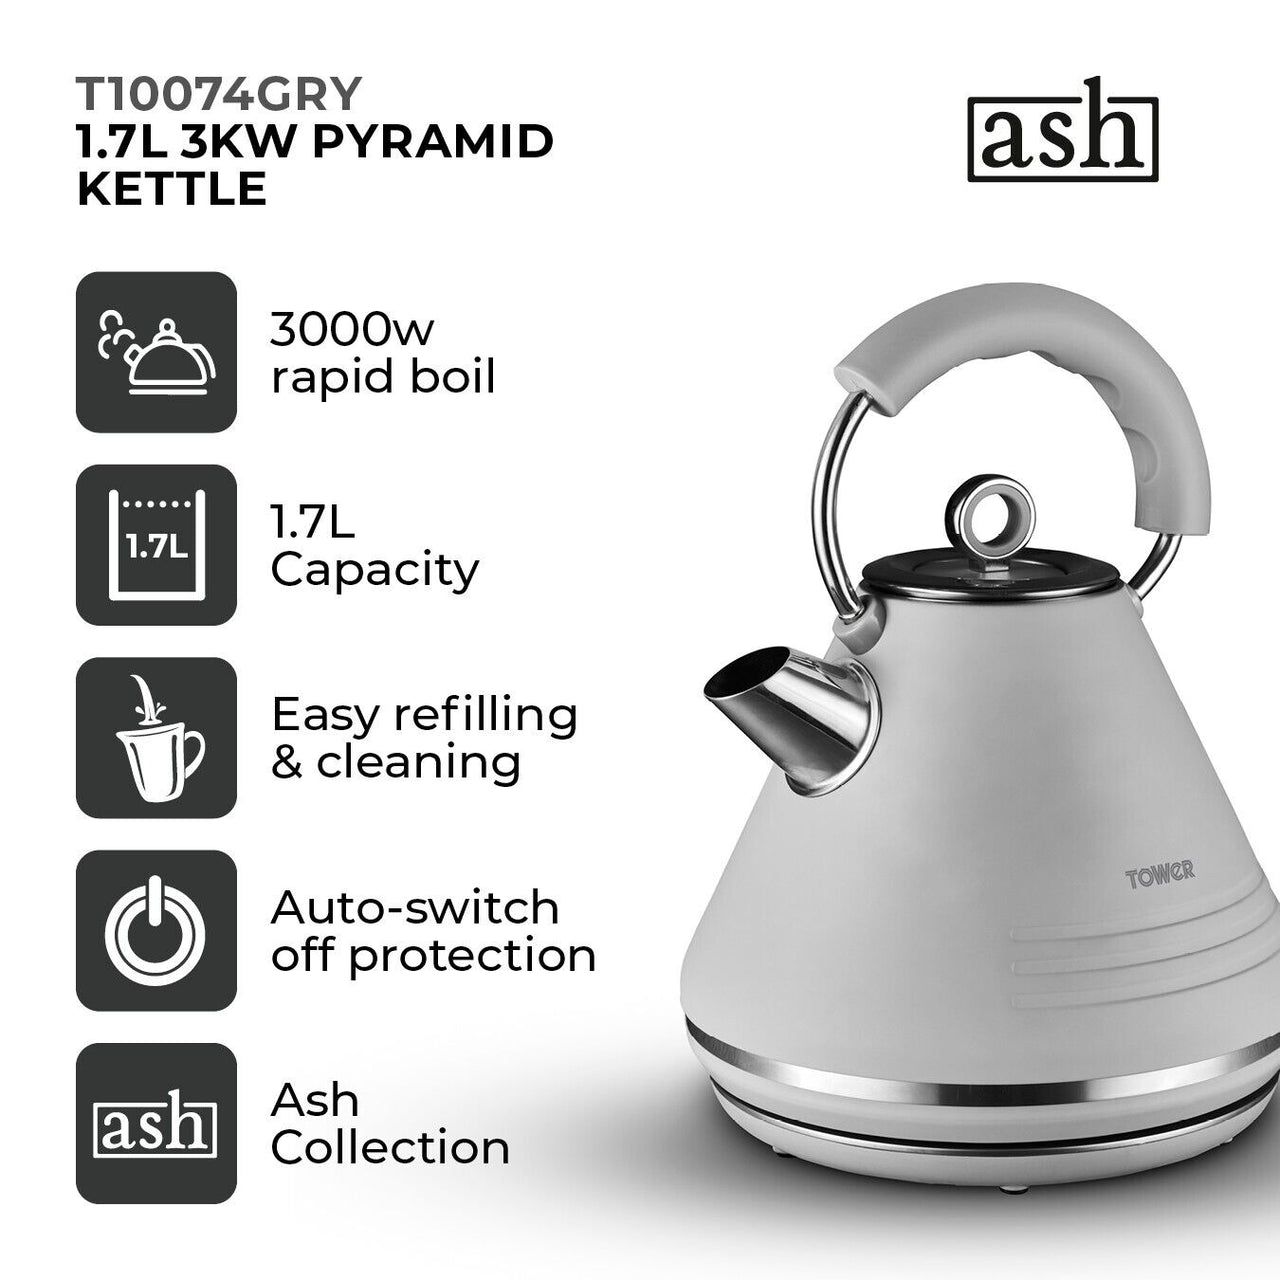 Tower Ash Grey & Chrome 1.7L 3KW Pyramid Kettle & 4 Slice Toaster Contemporary Set